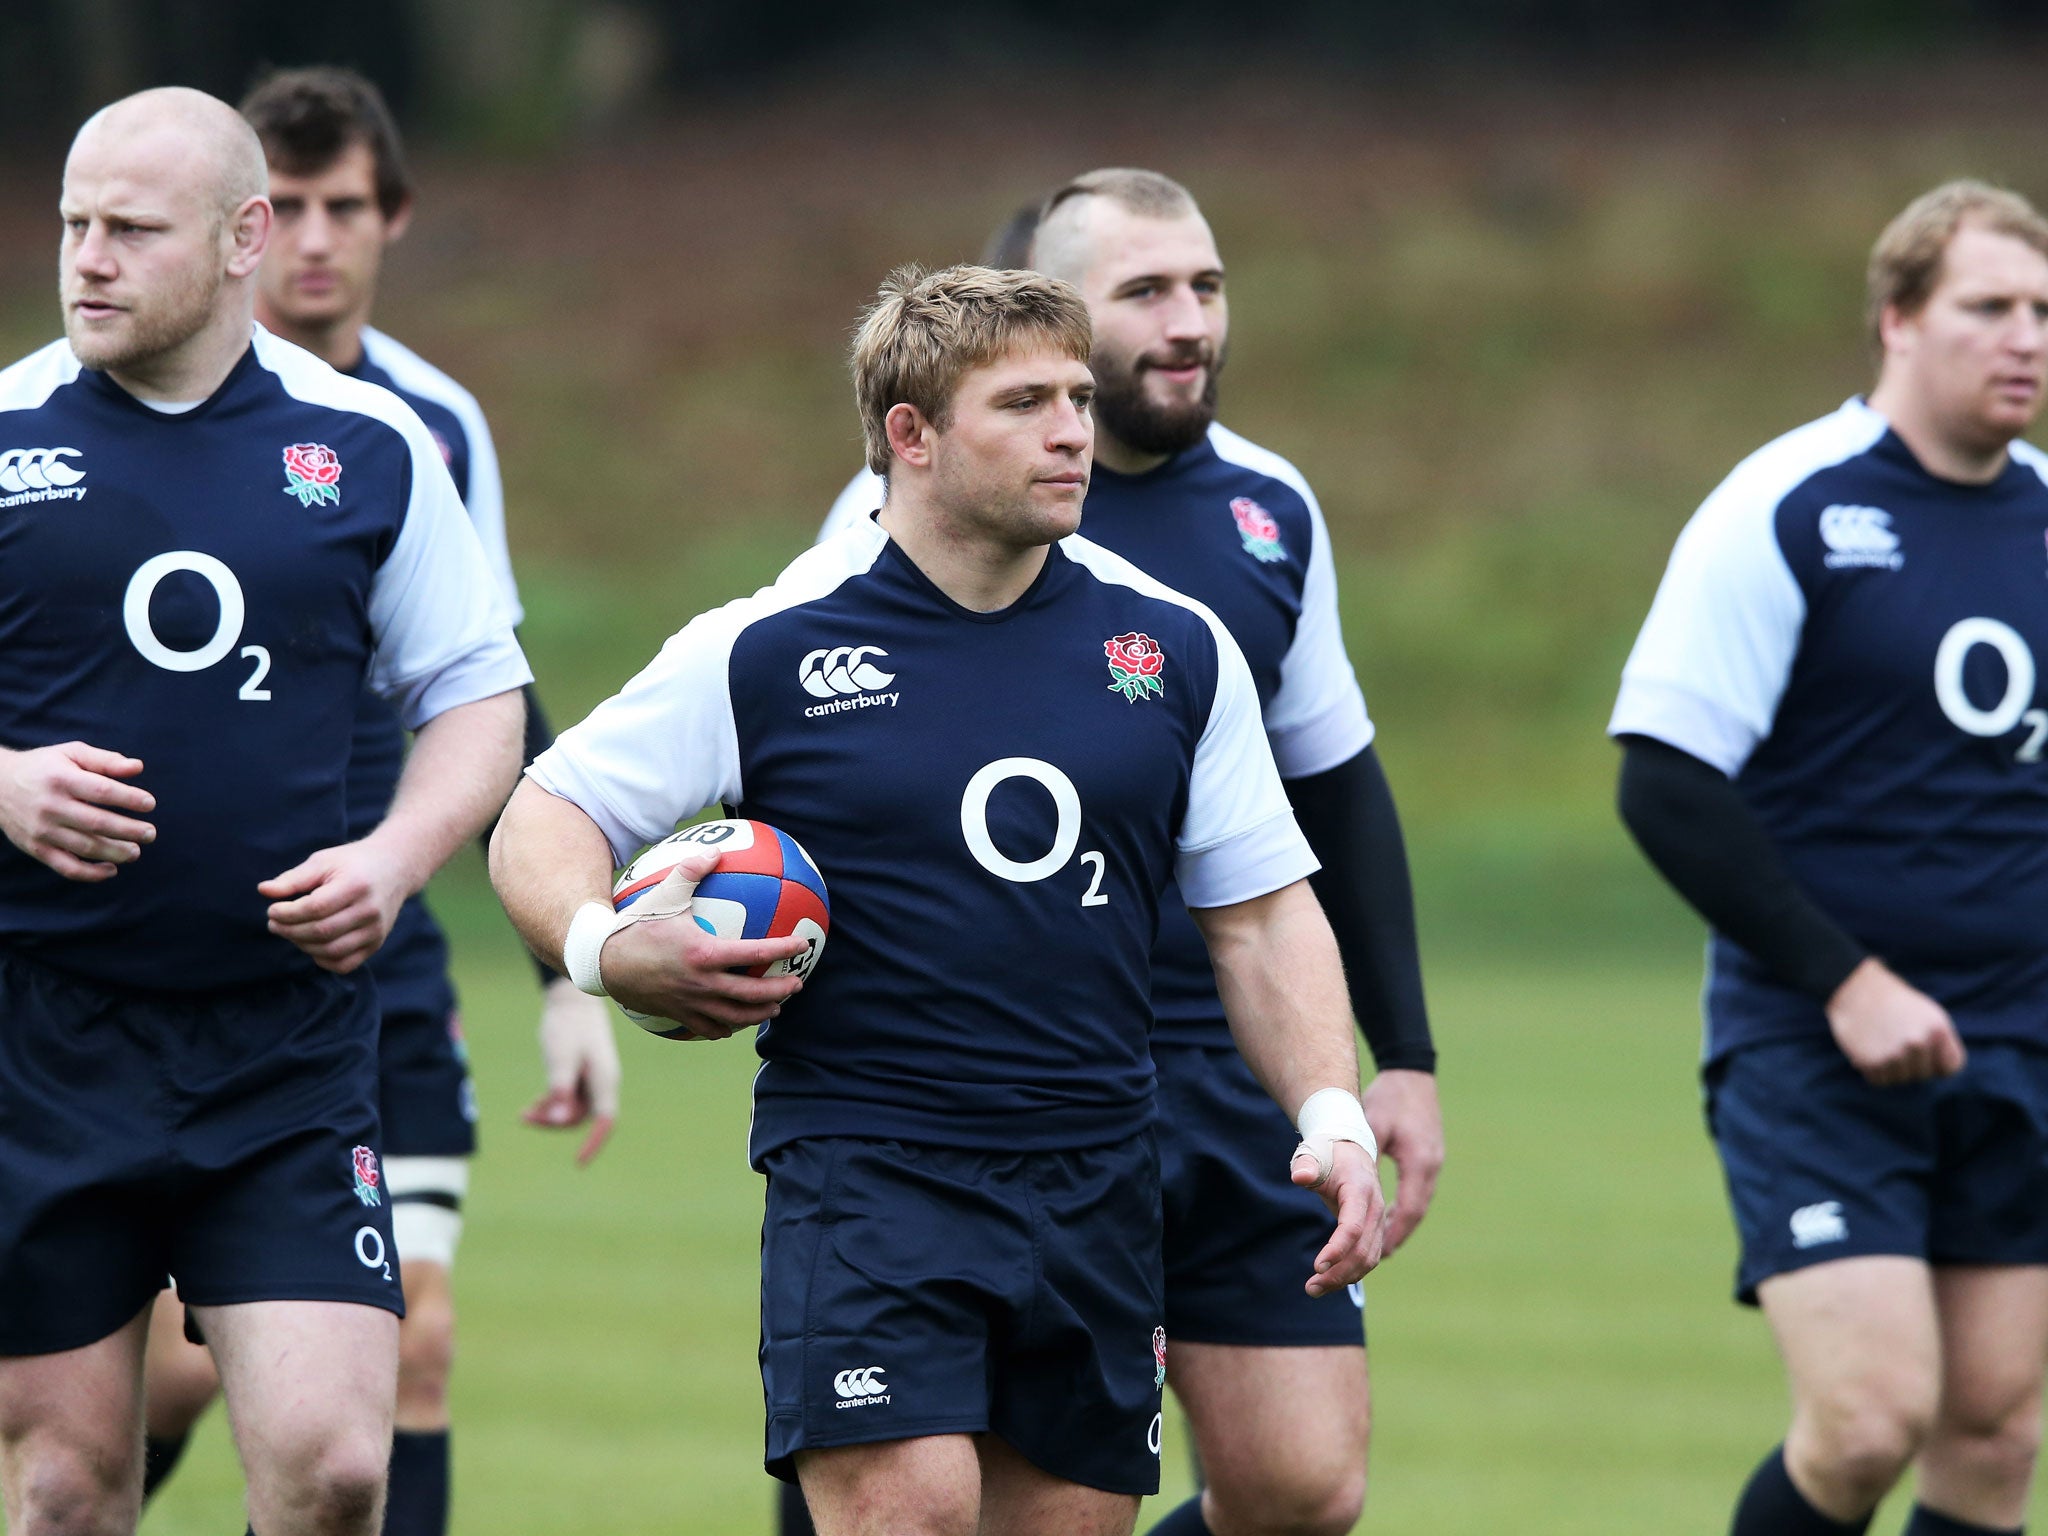 The England team training before their match with Australia